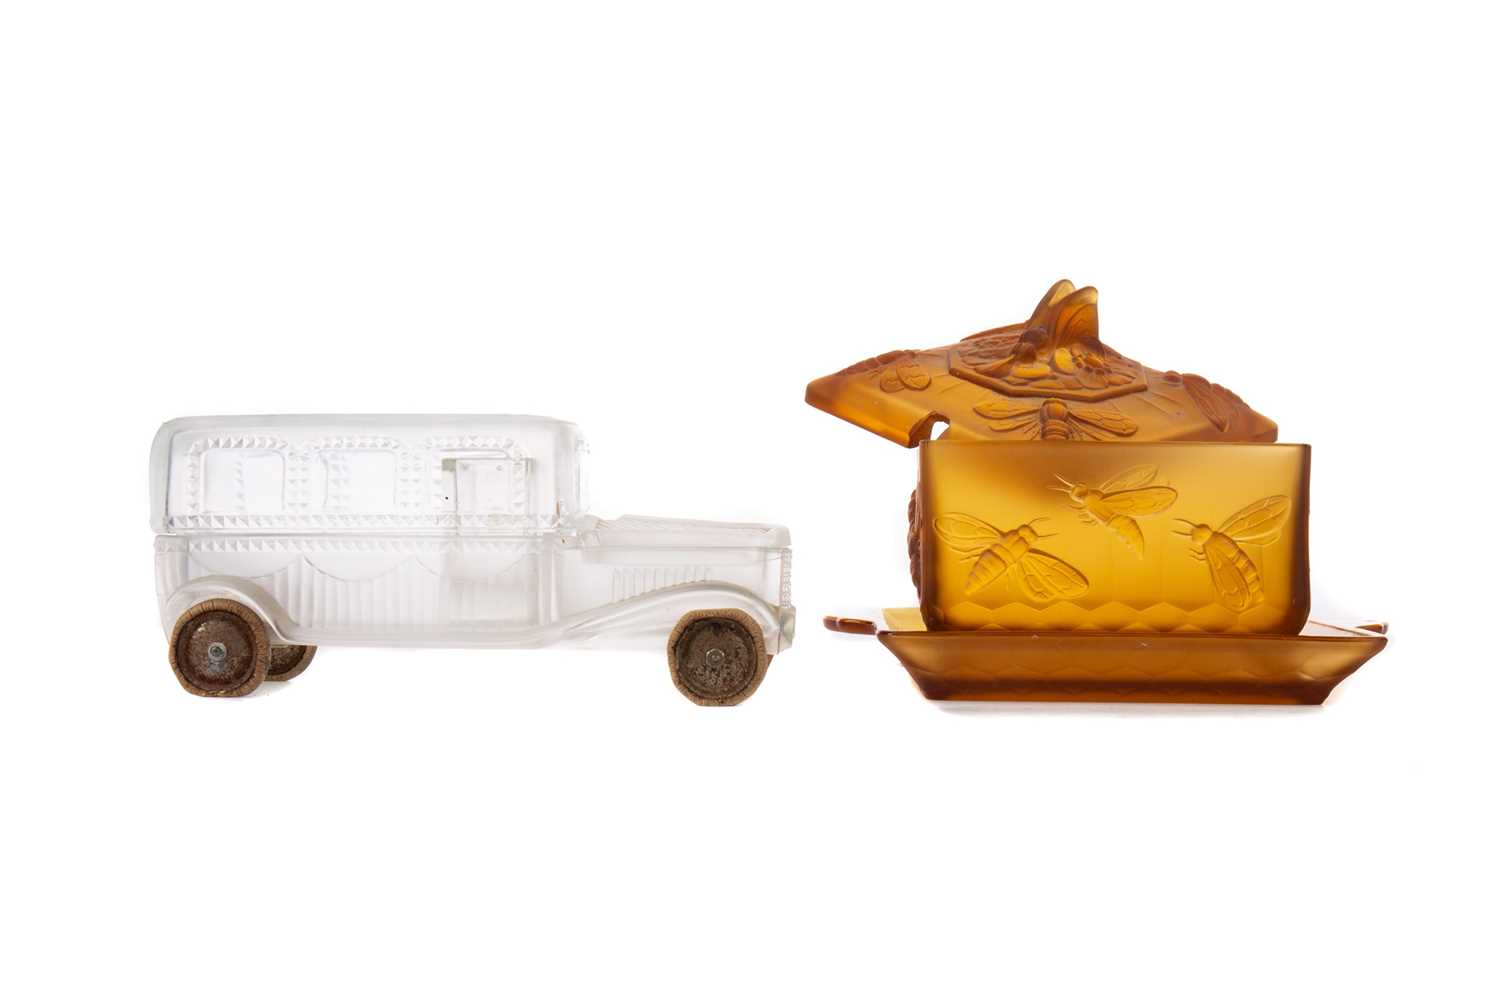 Lot 1126 - AN EARLY 20TH CENTURY AMBER GLASS PRESERVE JAR, COVER AND STAND, ALONG WITH A FROSTED GLASS JAR